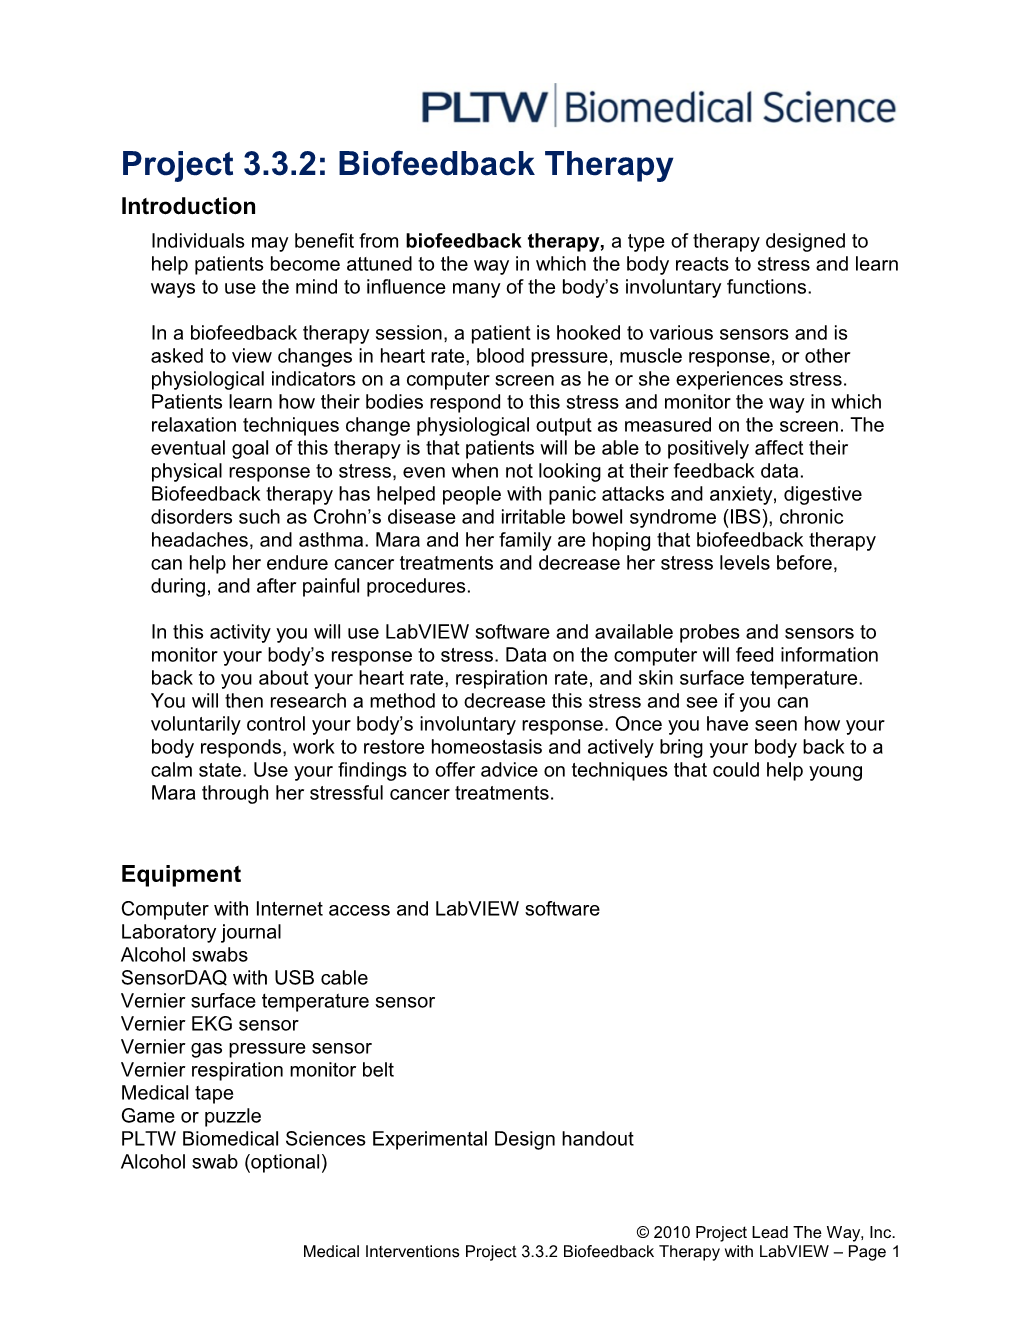 Project 3.3.2: Biofeedback Therapy